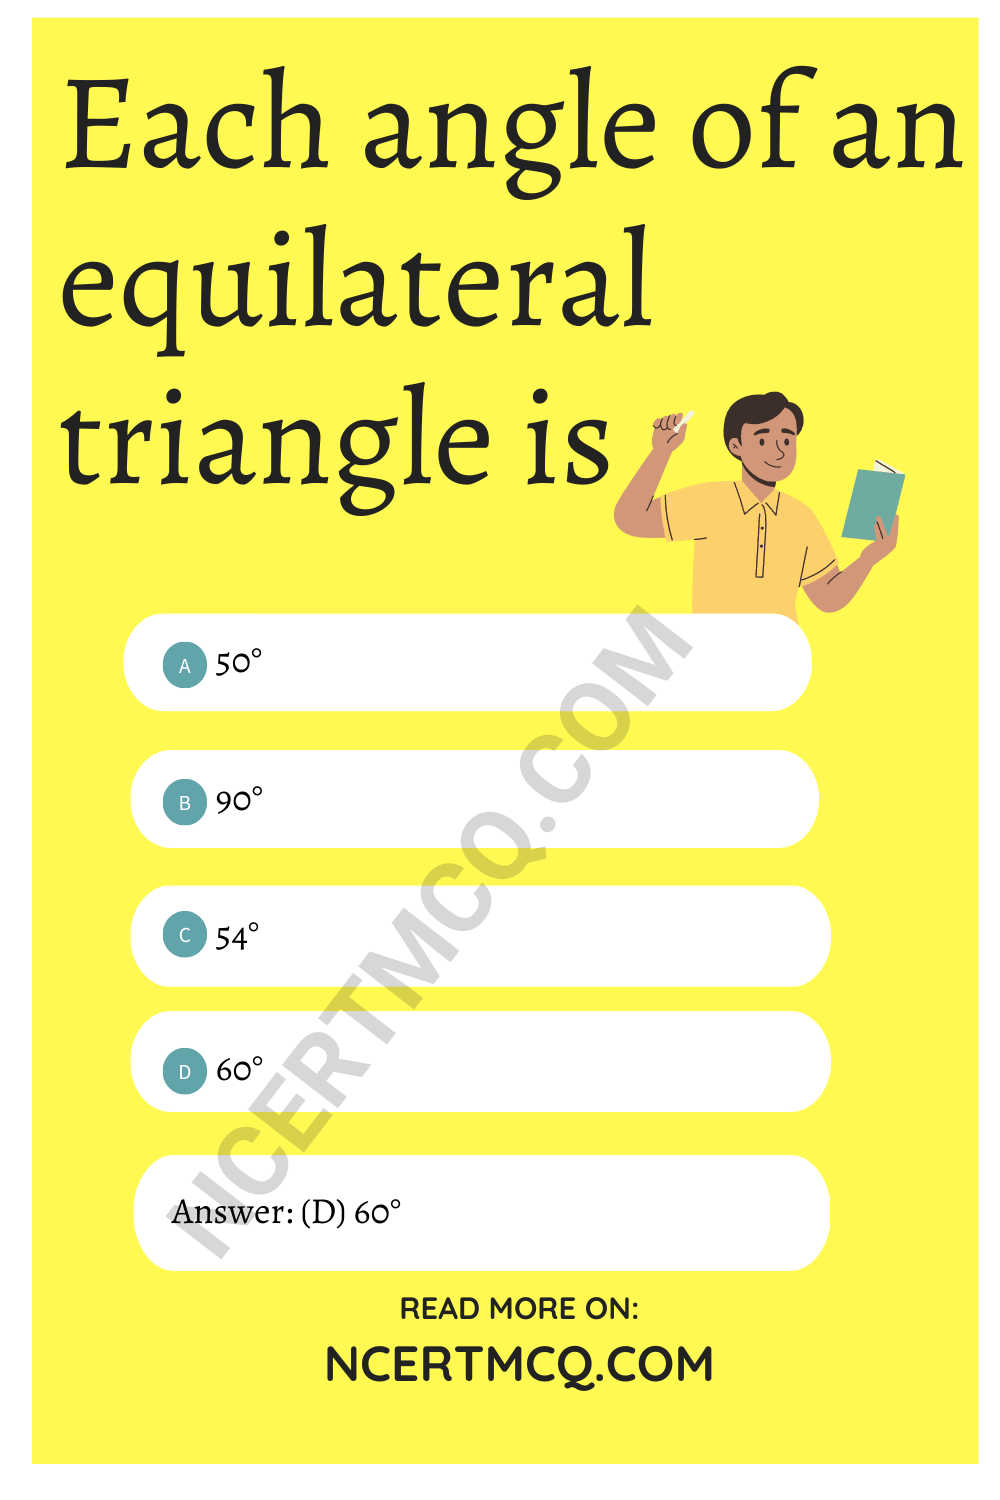 Each angle of an equilateral triangle is